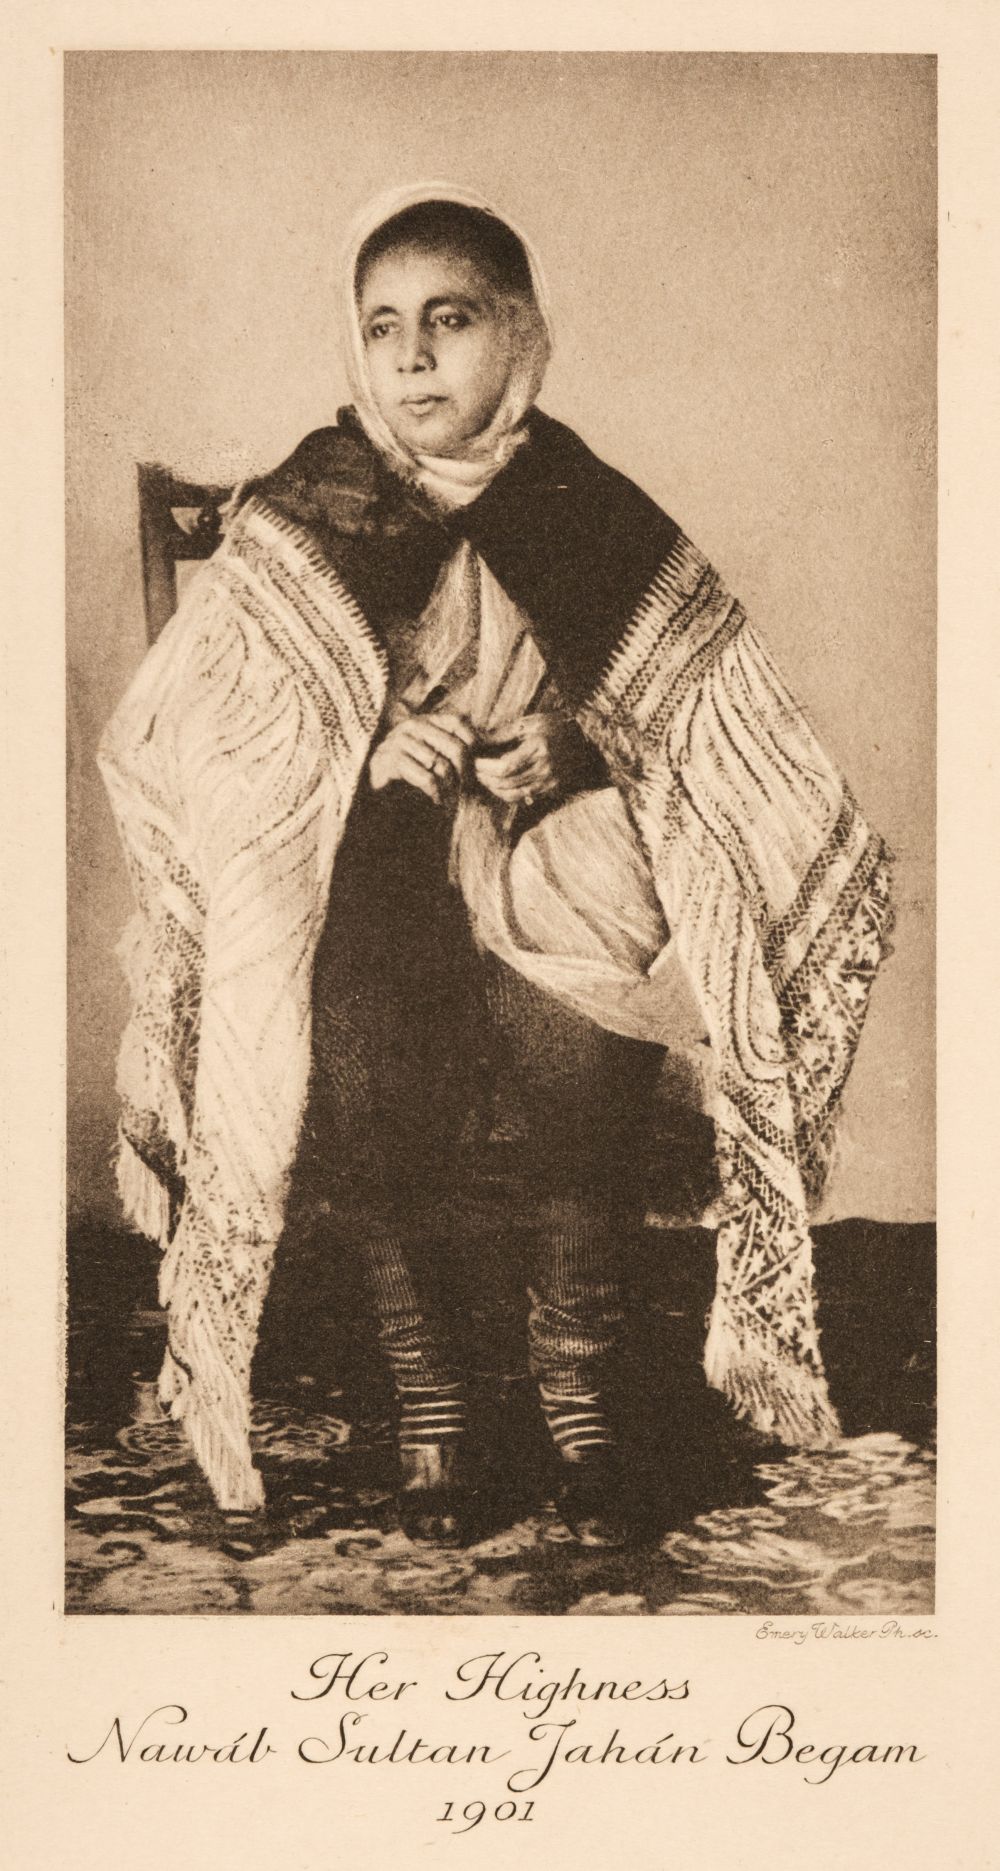 Sultan Jahan Begam (Nawab, Her Highness). An Account of My Life, 2 volumes, 1910 and 1922